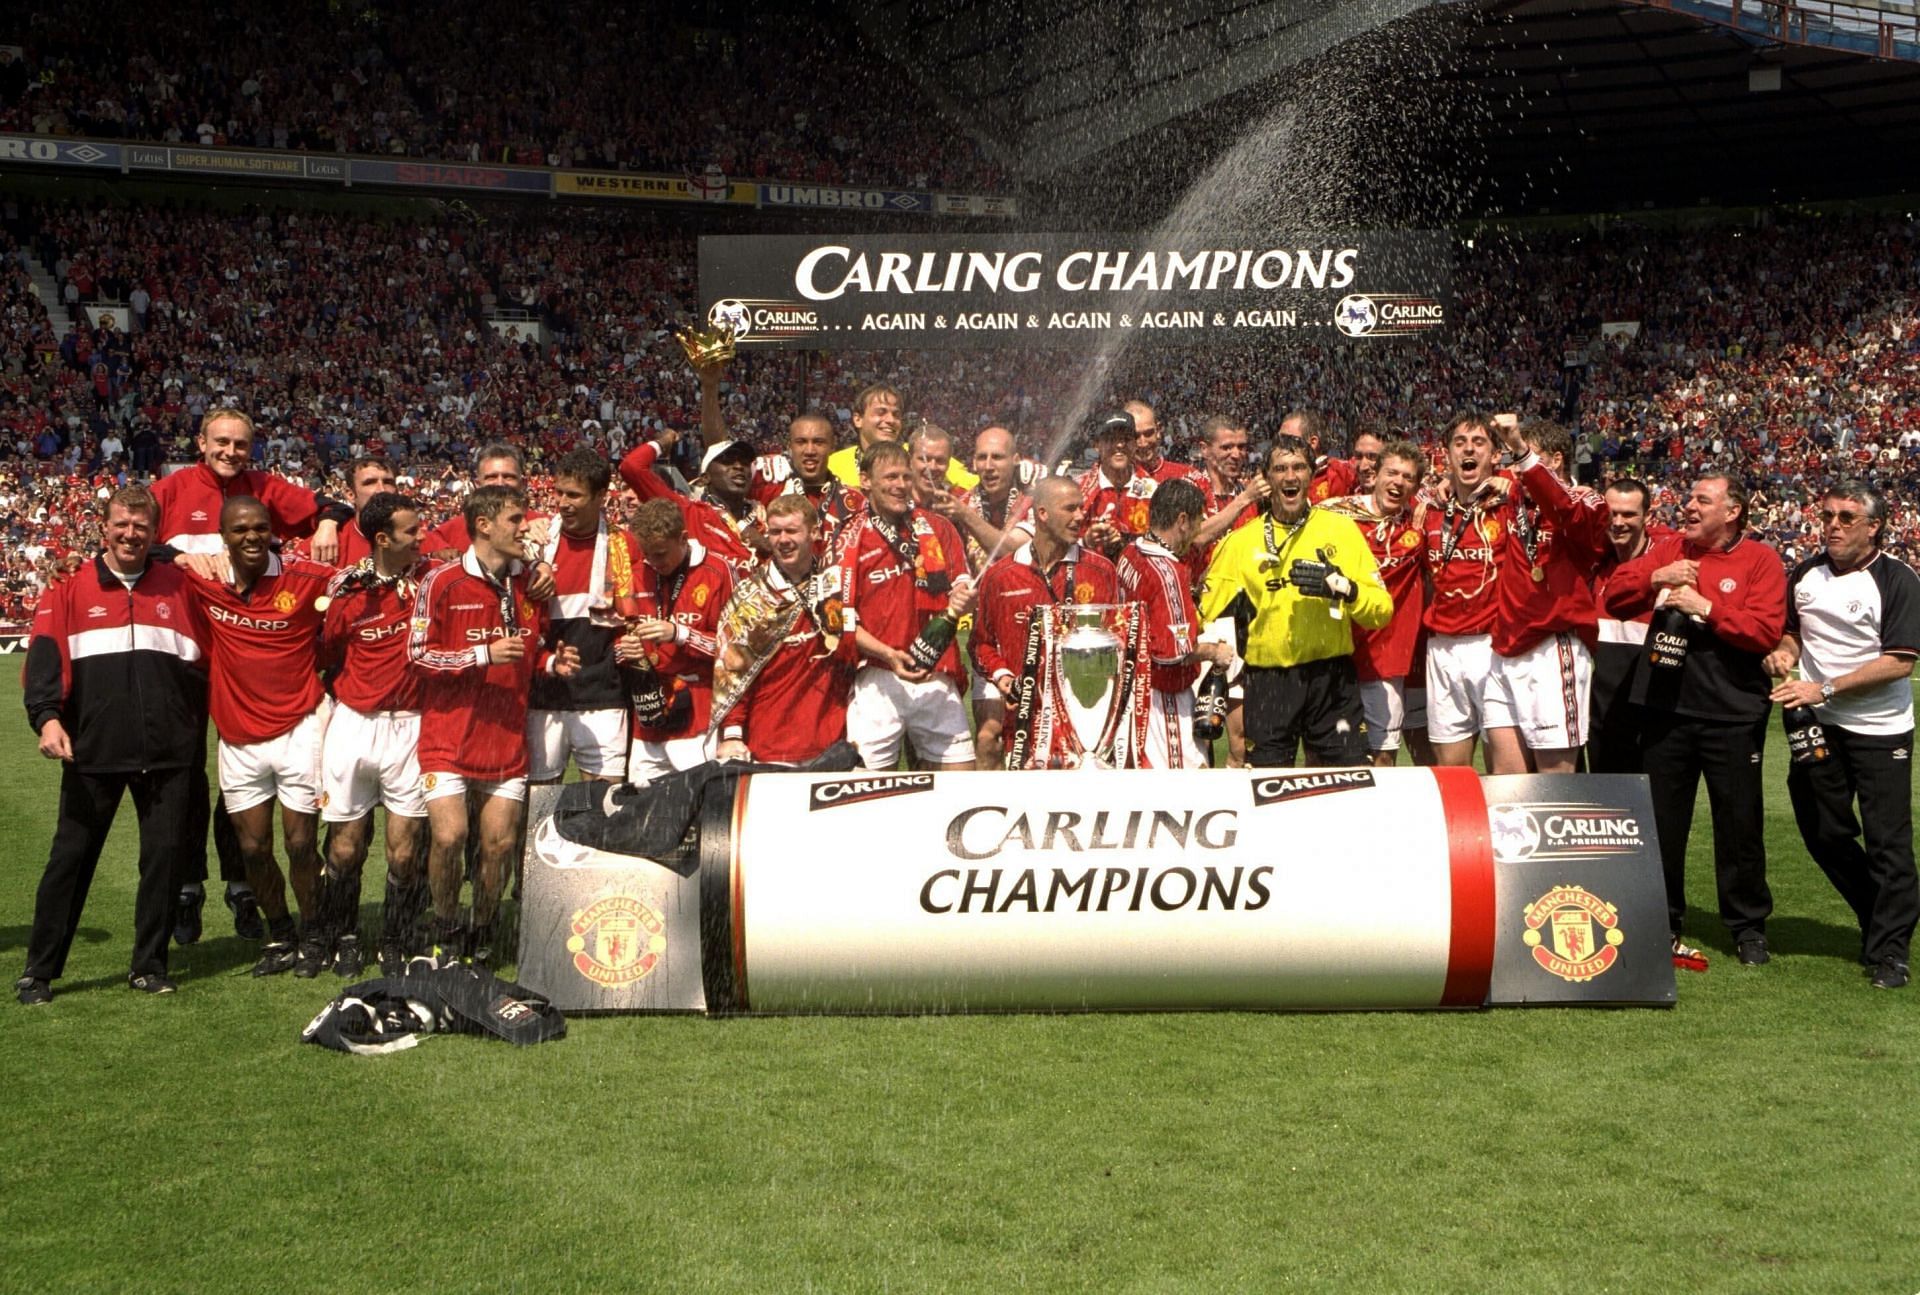 Manchester United became Premier League champions for the sixth time in eight seasons in 1999-00 (Image courtesy: premierleague.com)